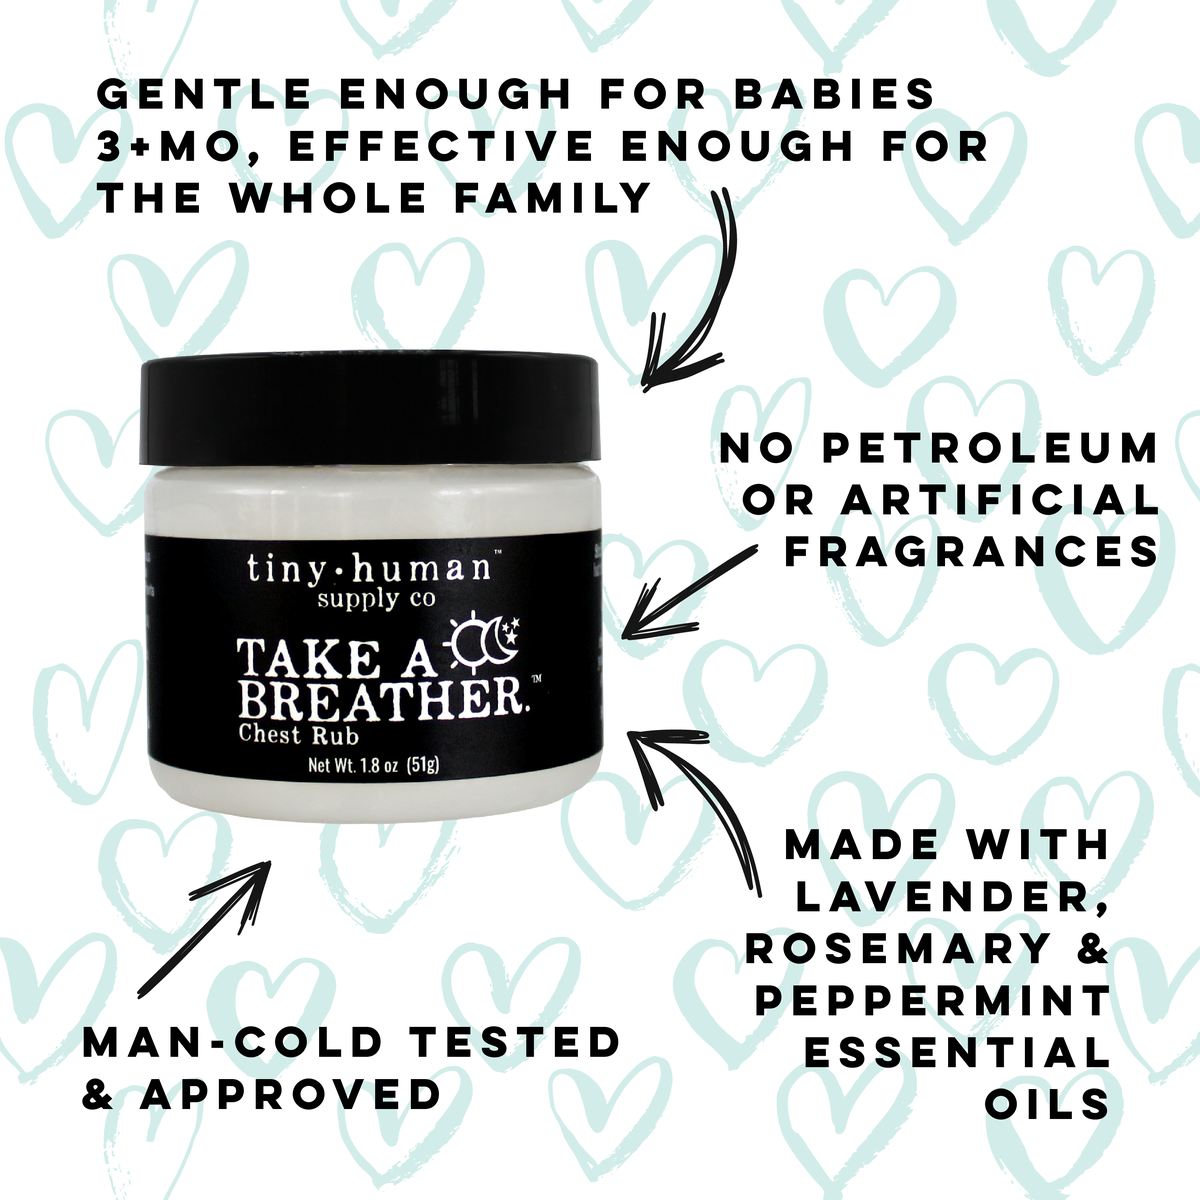 Take a Breather, Chest Rub by Tiny Human Supply Co